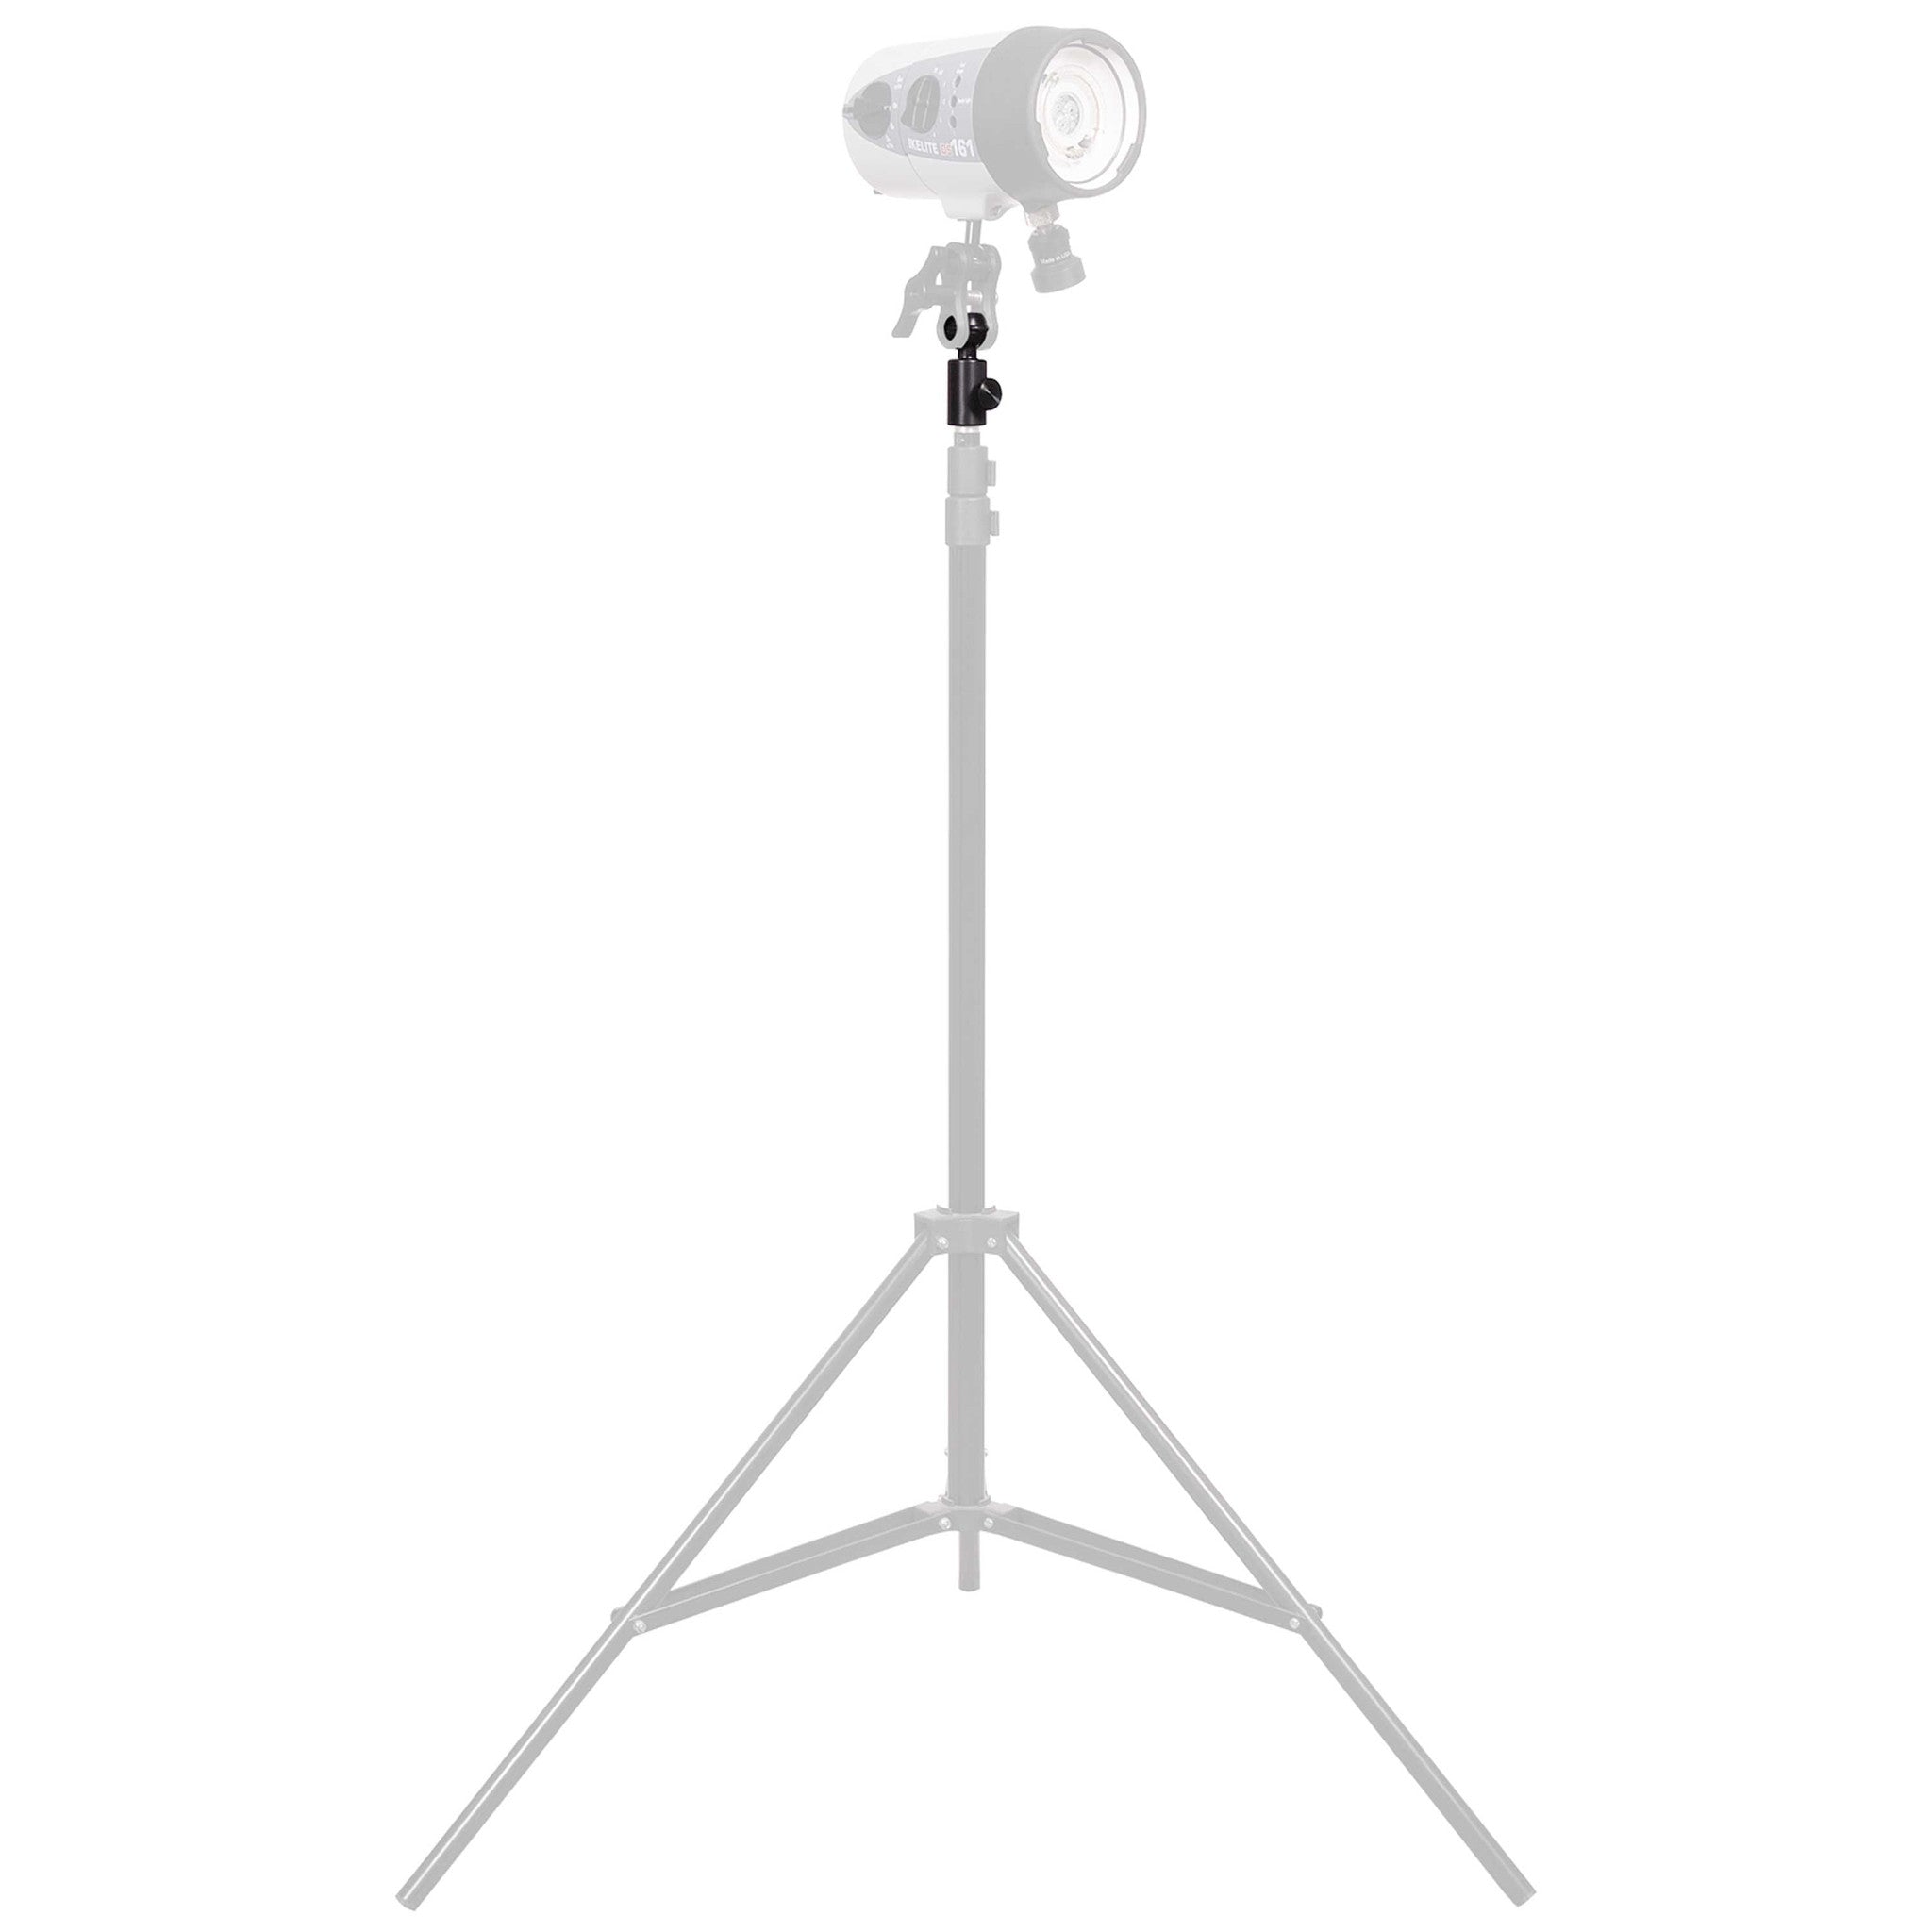 1-inch Ball Mount for Studio Light Stands